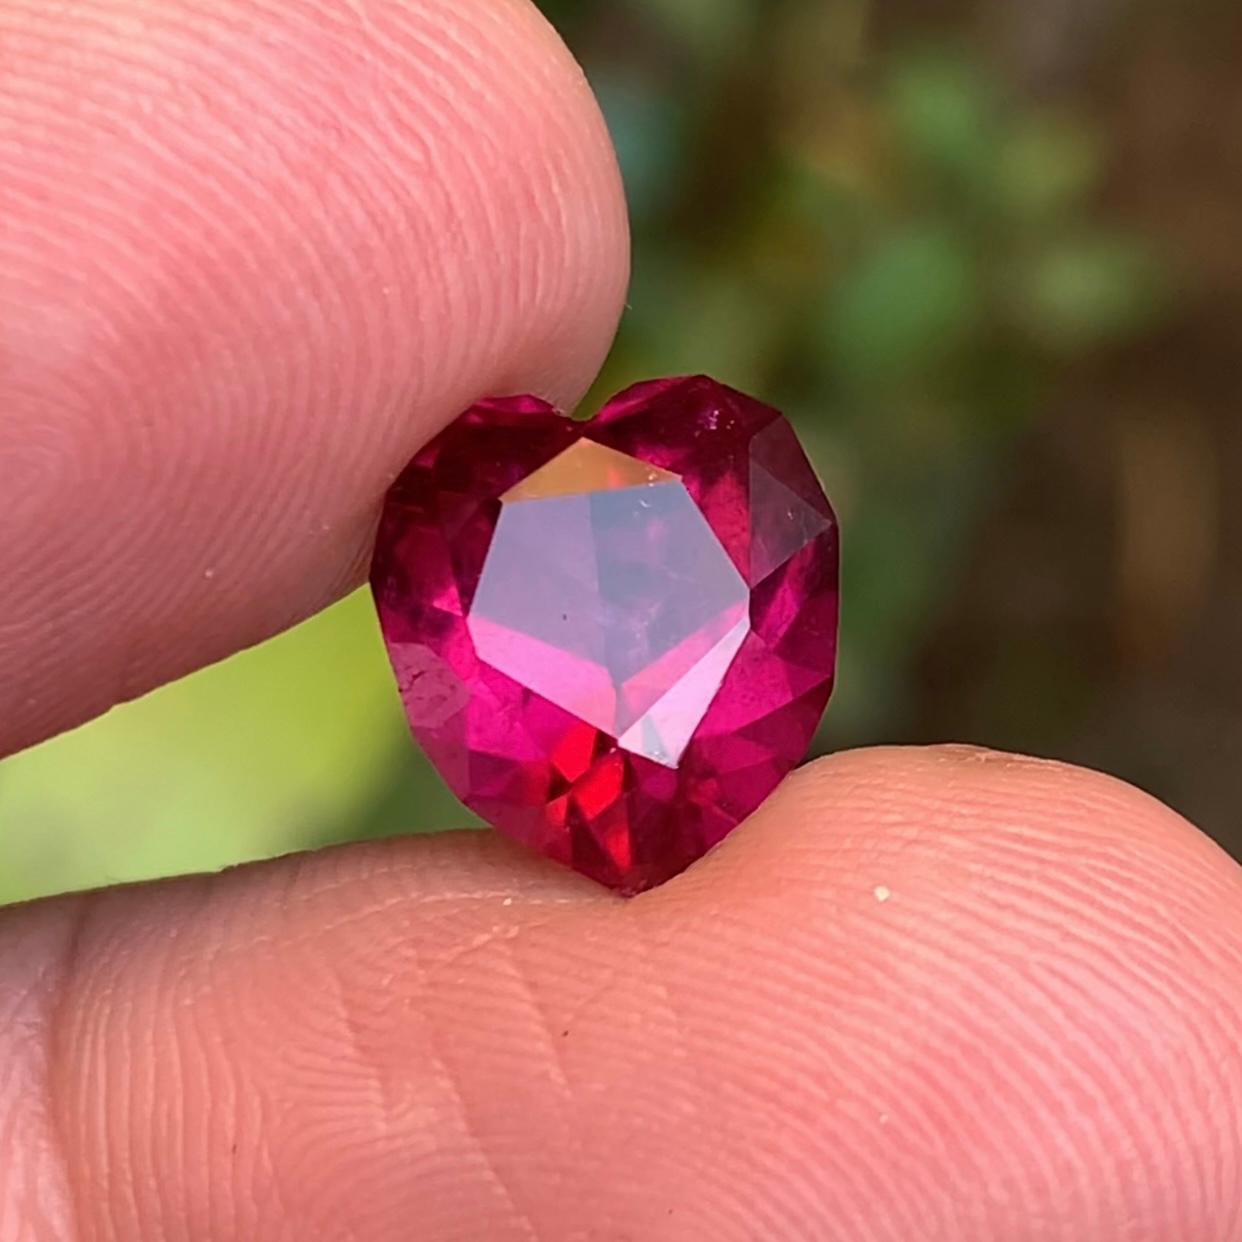 Introducing our exquisite Reddish Pink Rubellite Tourmaline – a top-tier gemstone meticulously crafted into a captivating heart shape. Renowned for its rarity, the intense red hue of this Pink Rubellite makes it truly exceptional. This one-of-a-kind